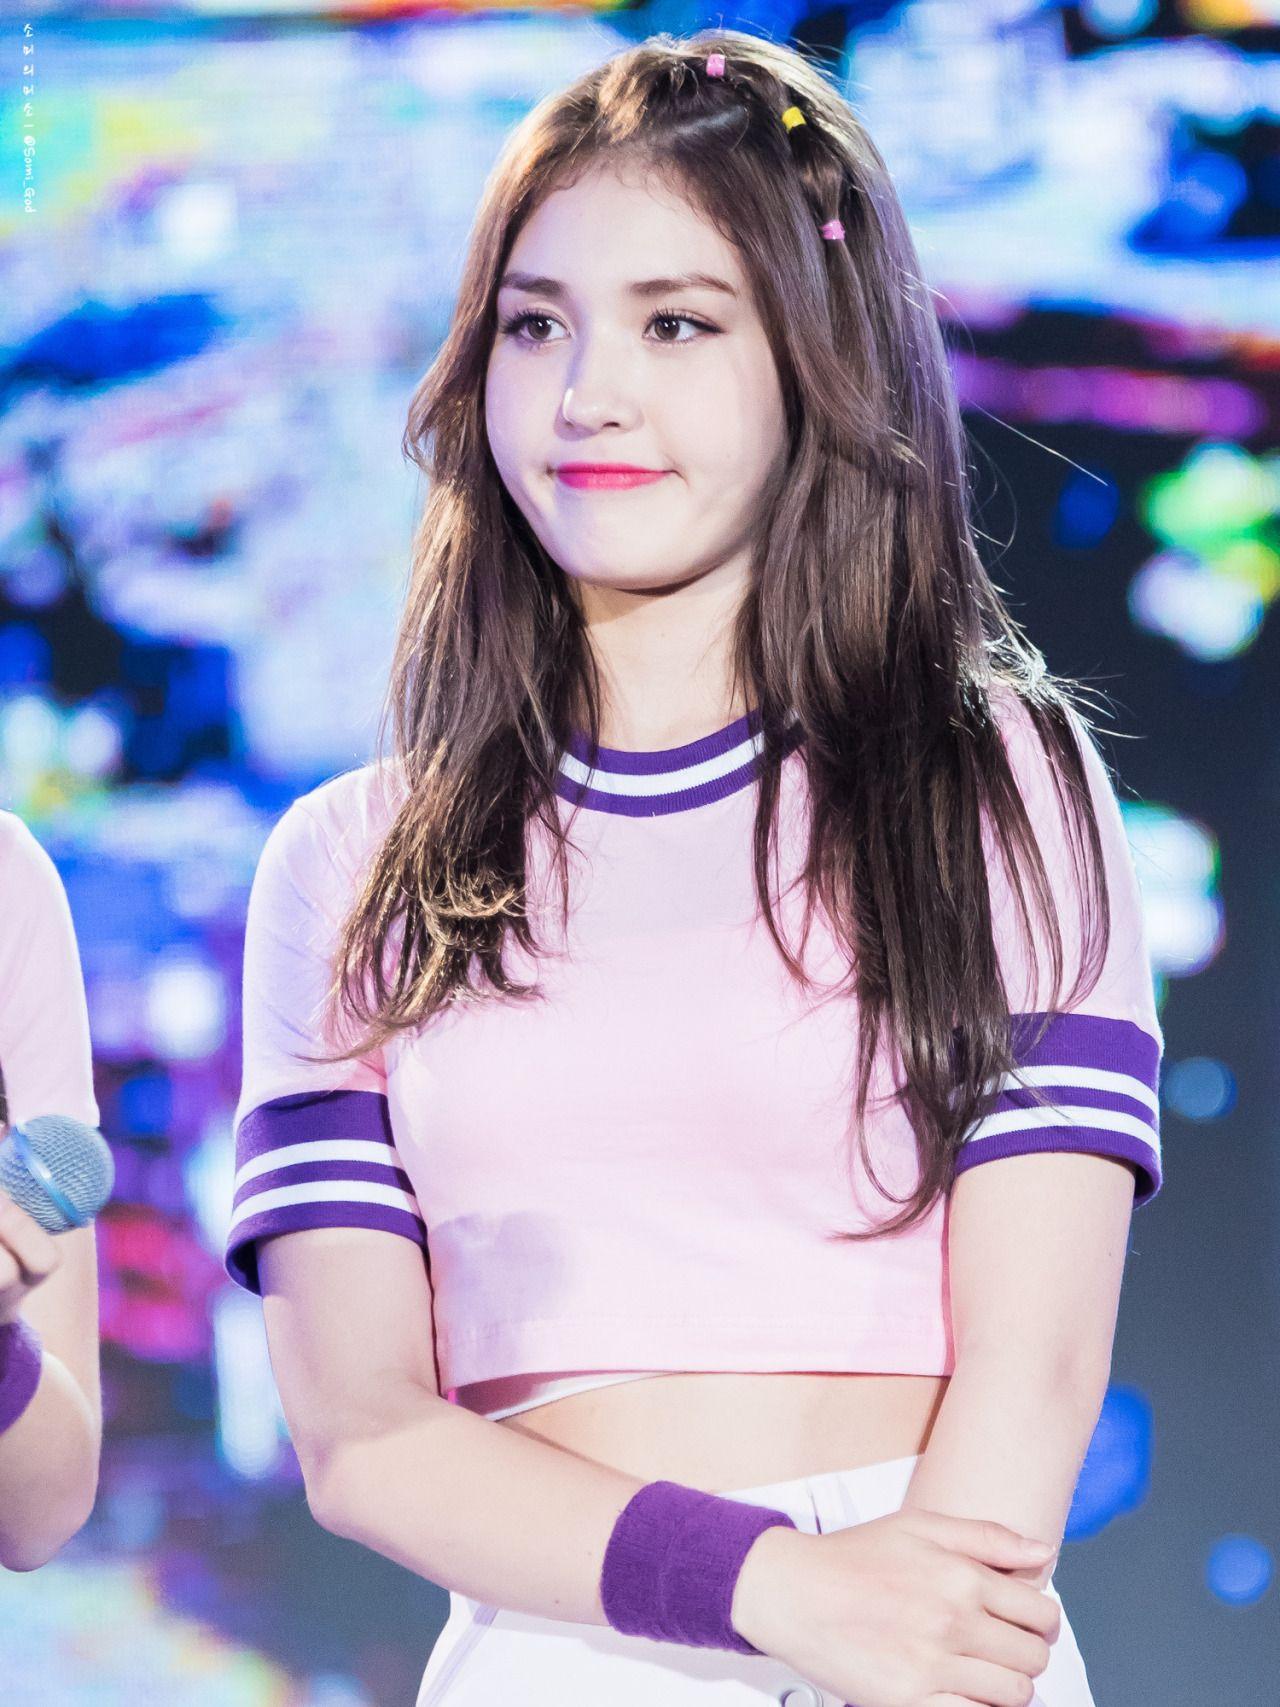 Jeon Somi Android IPhone Wallpaper KPOP Image Board